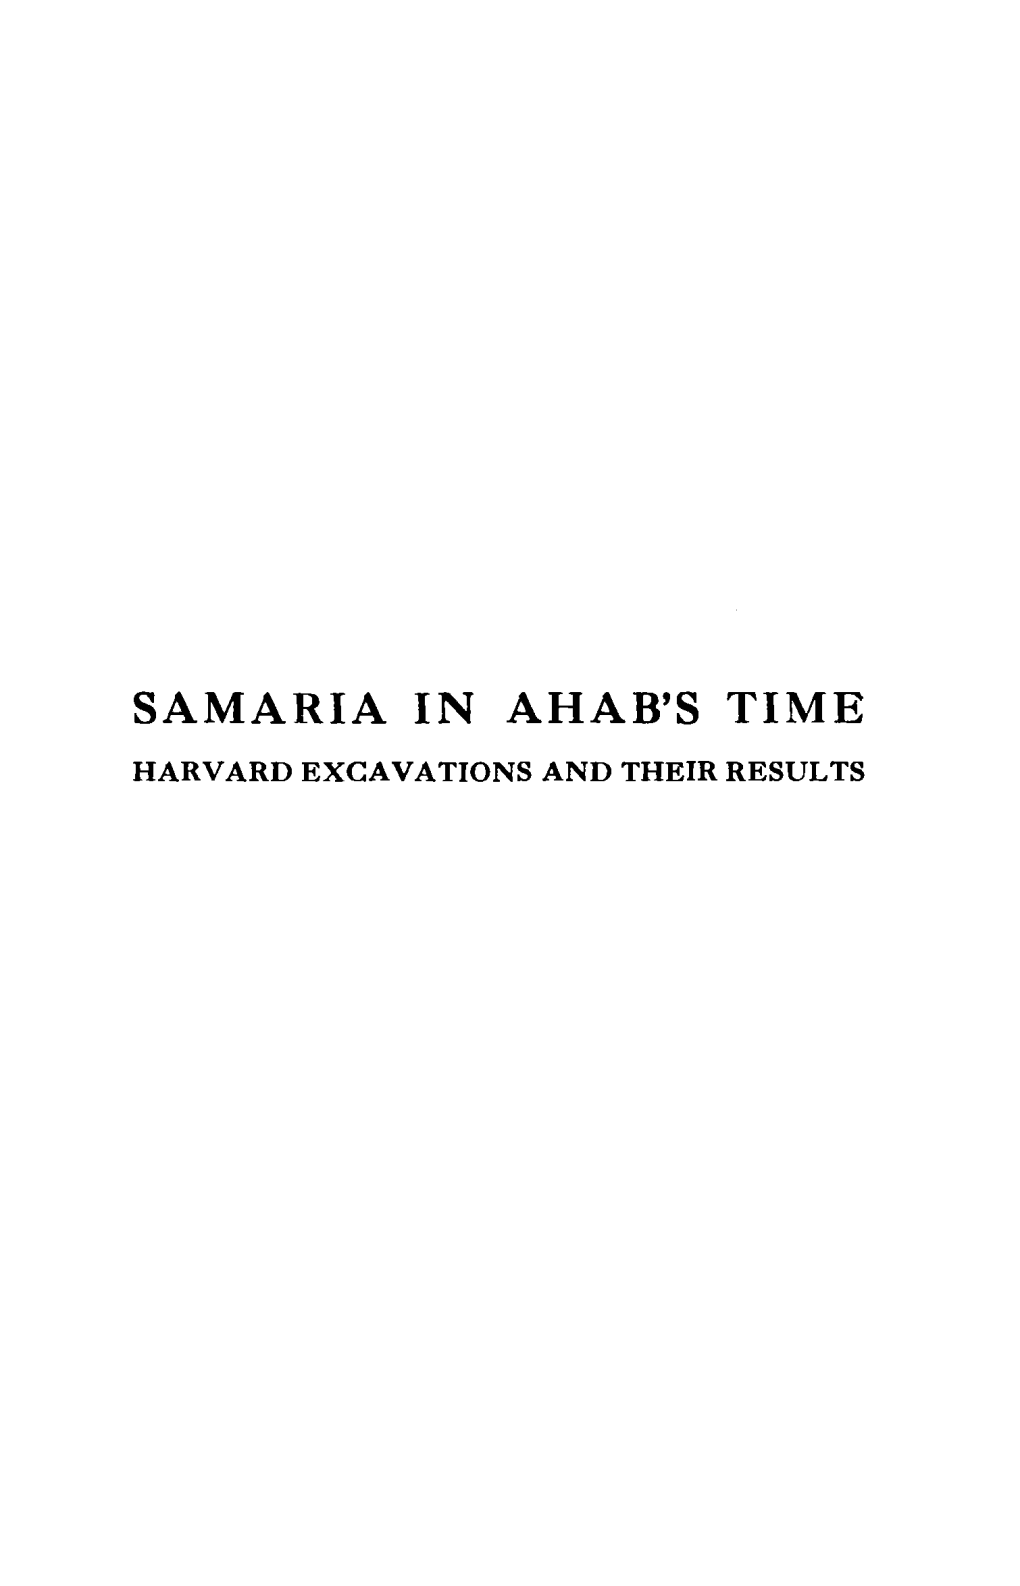 Samaria in Ahab's Time Harvard Excavations and Their Res Ul Ts Samaria in Ahab's Time Harvard Excavations and Their Results